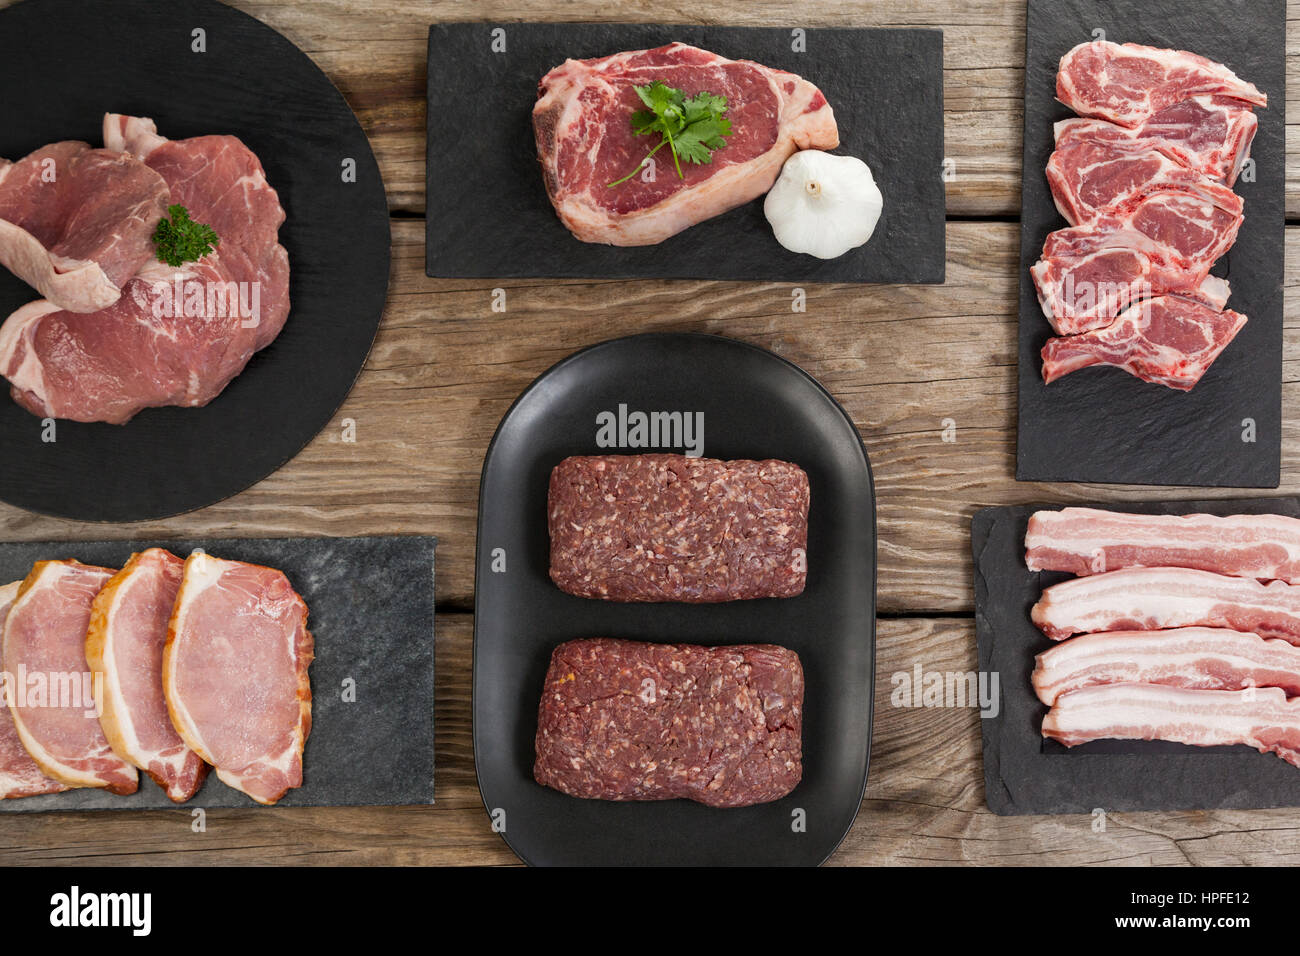 Varieties of meat on black tray against wooden background Stock Photo